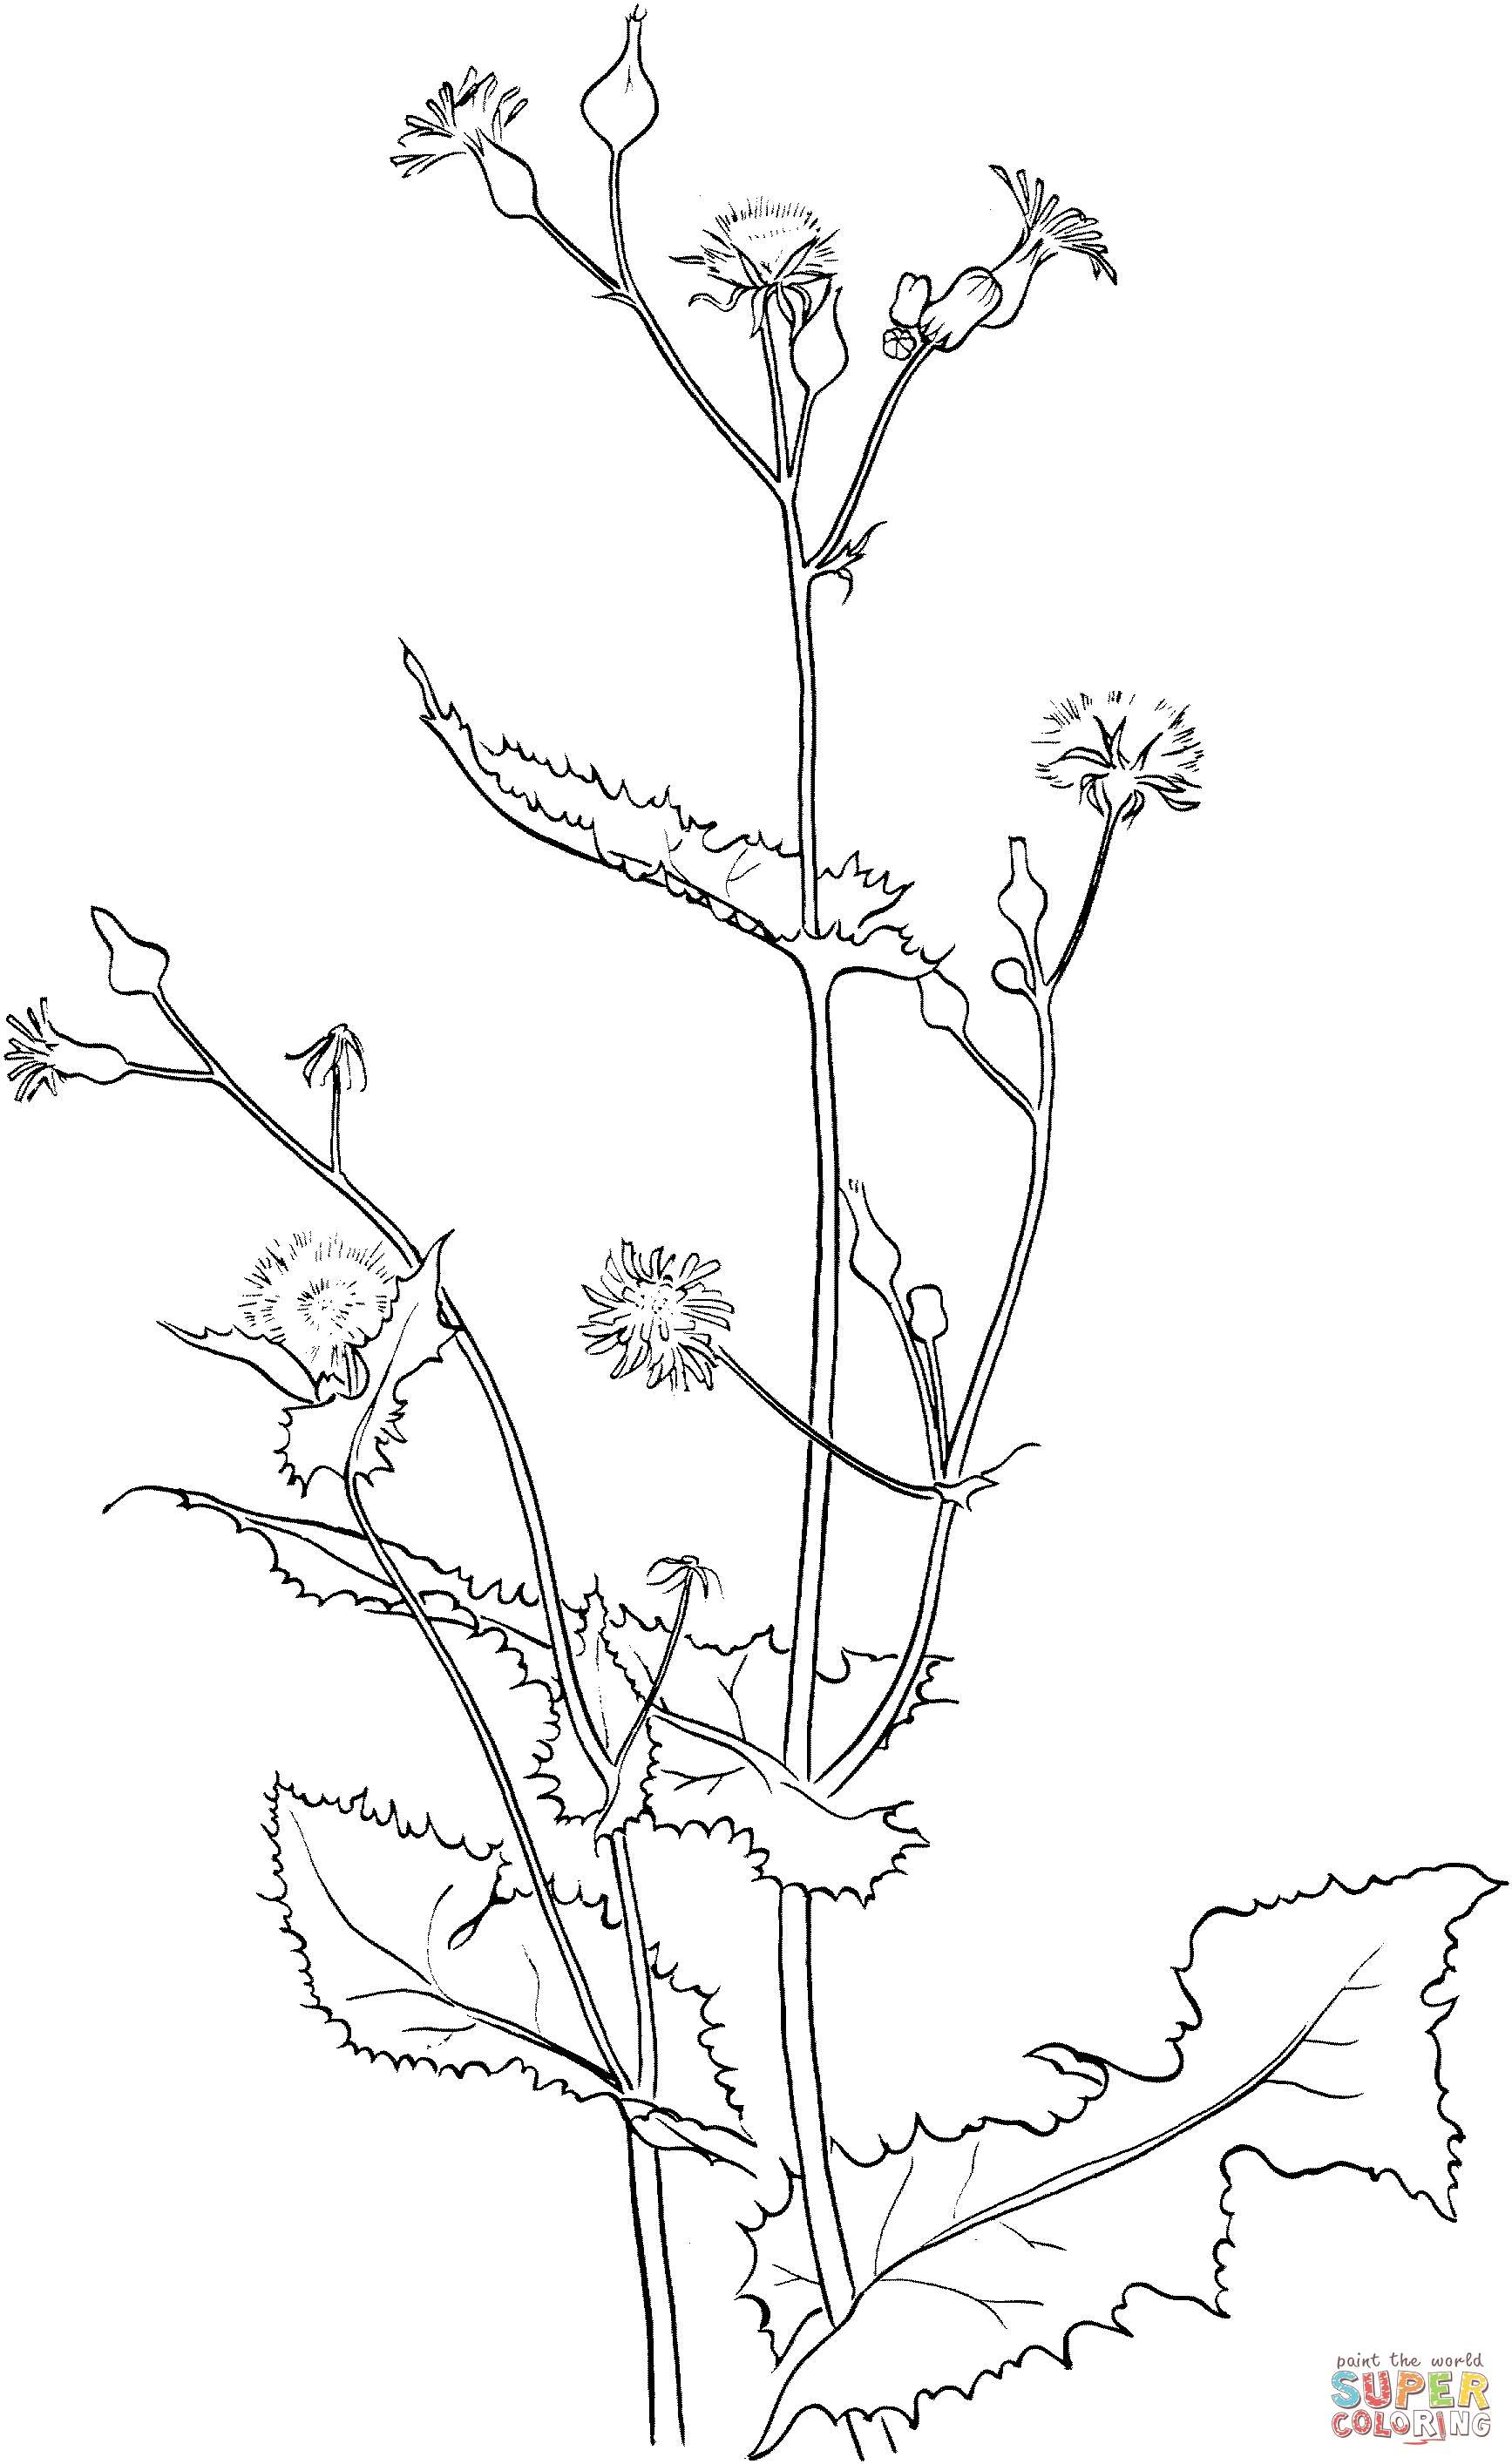 Smooth Sow Thistle Coloring Pages